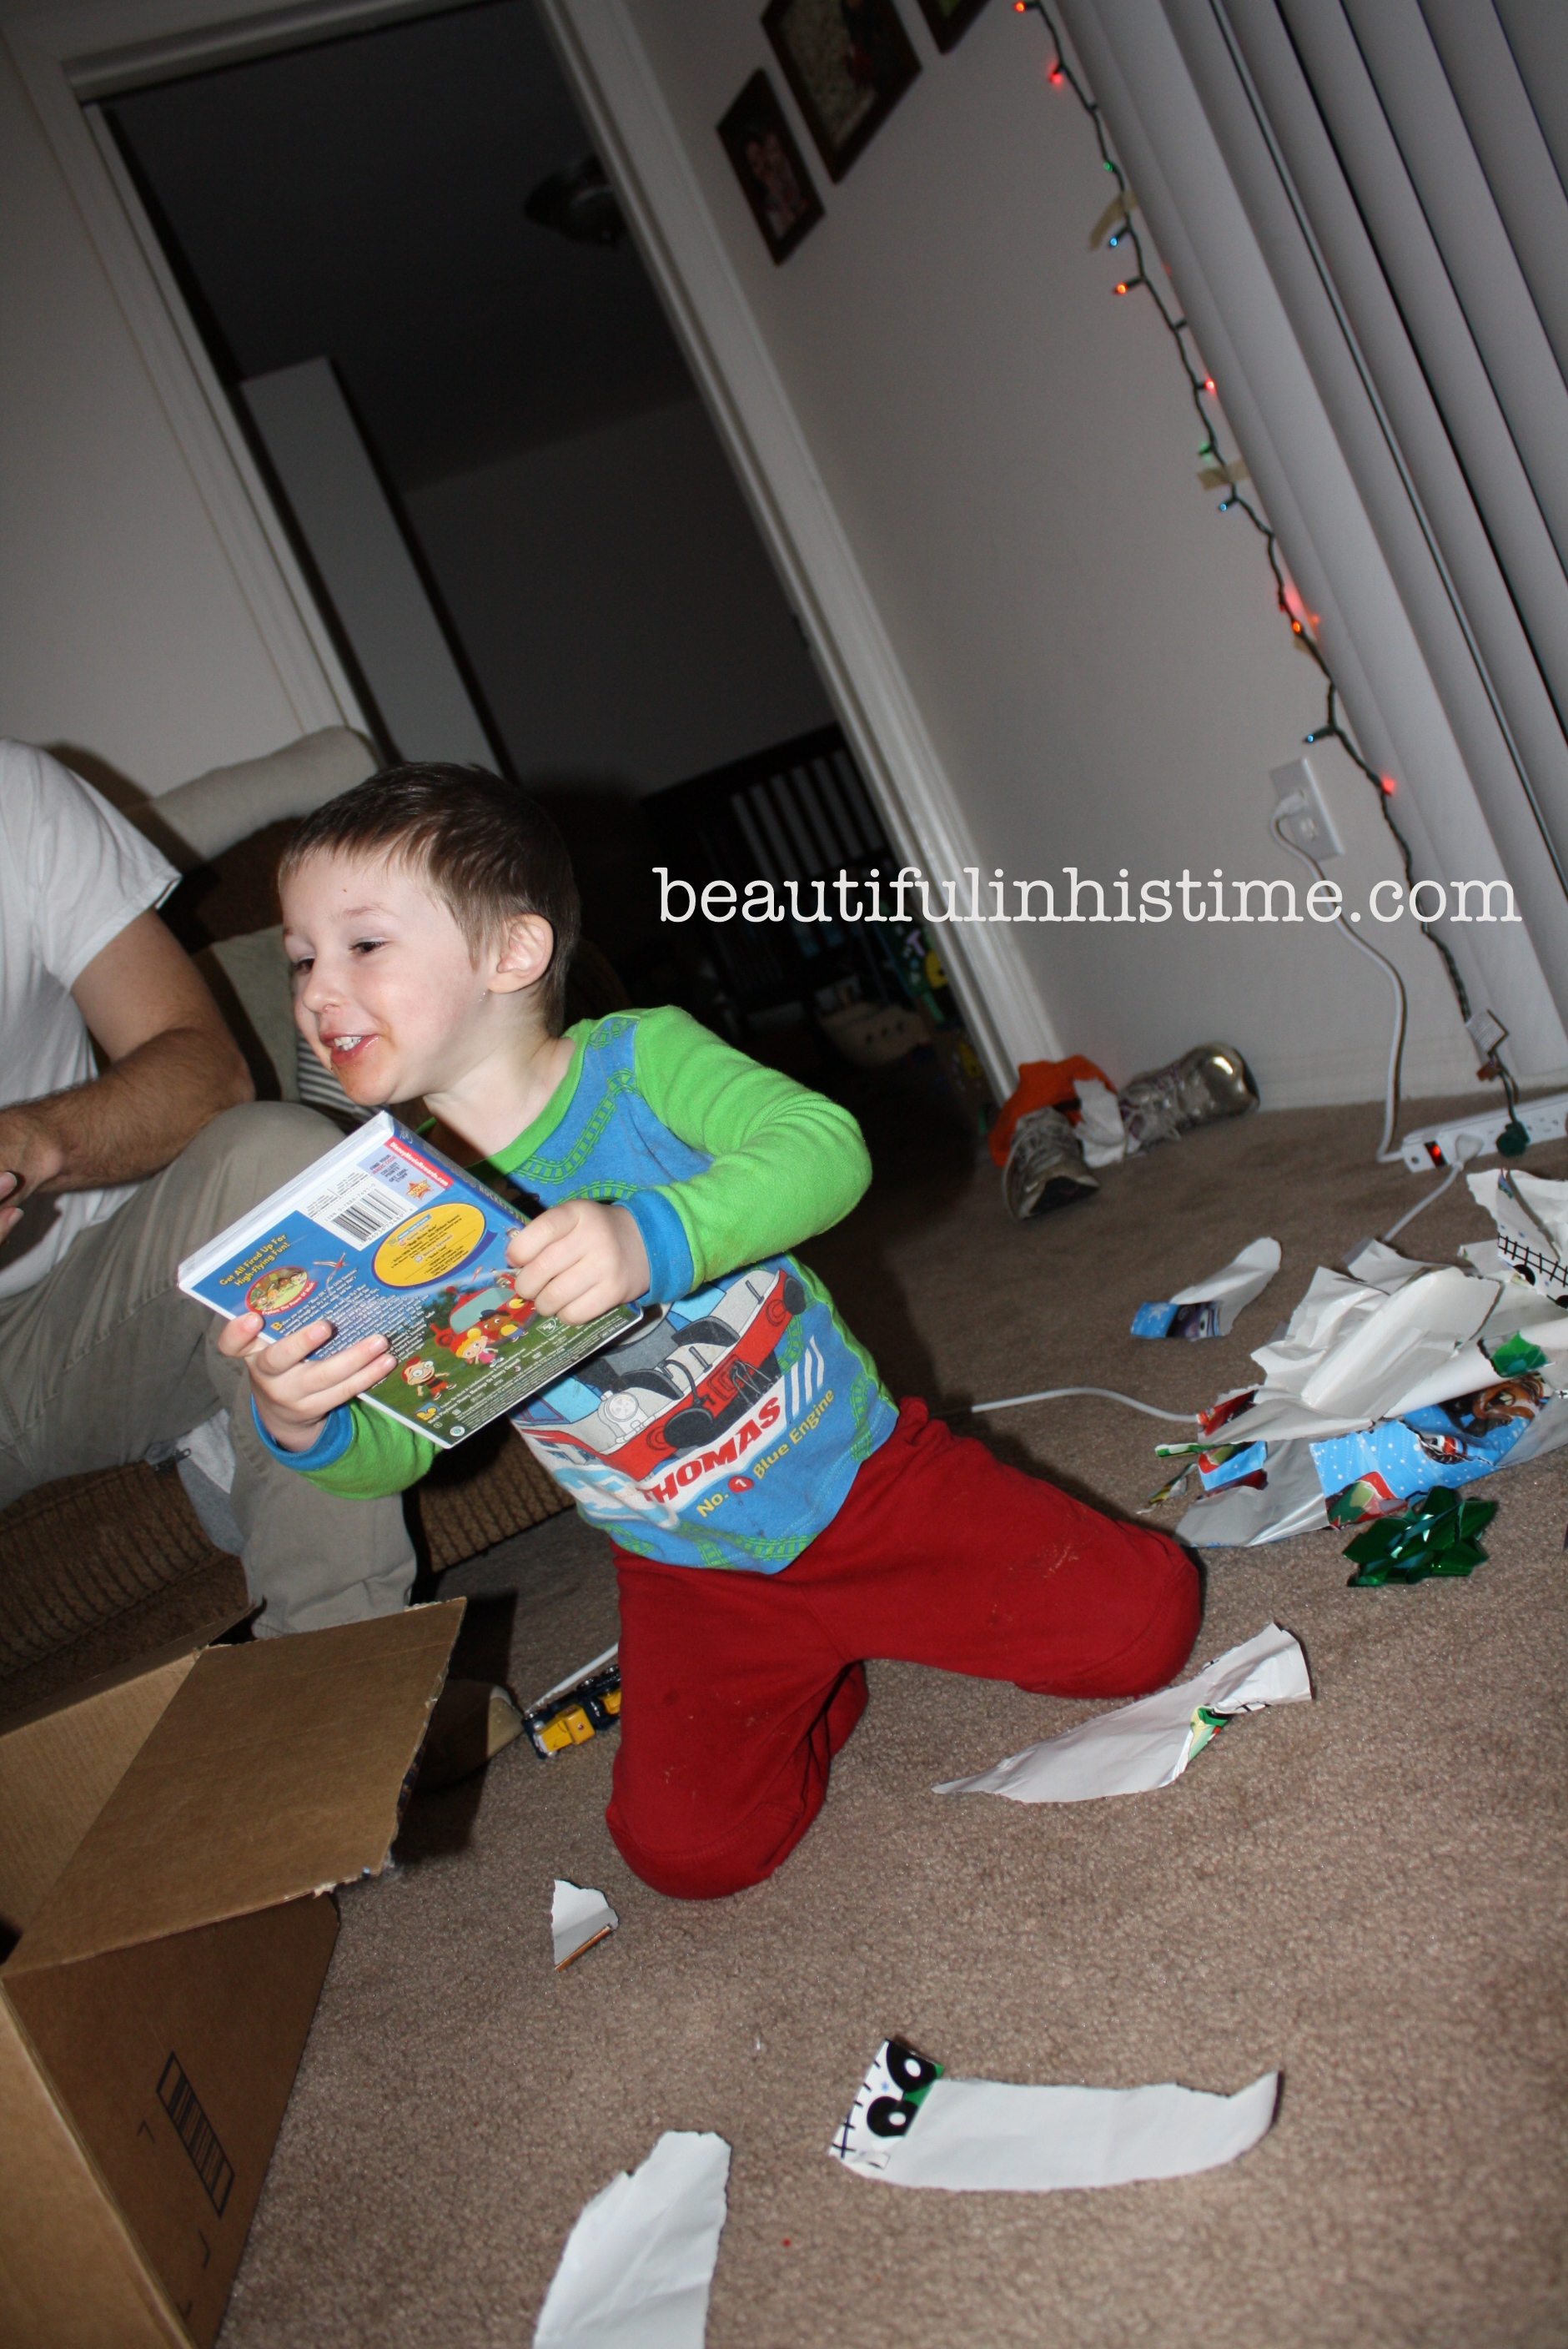 Beauty in the Mess ~ A Christmas Edition